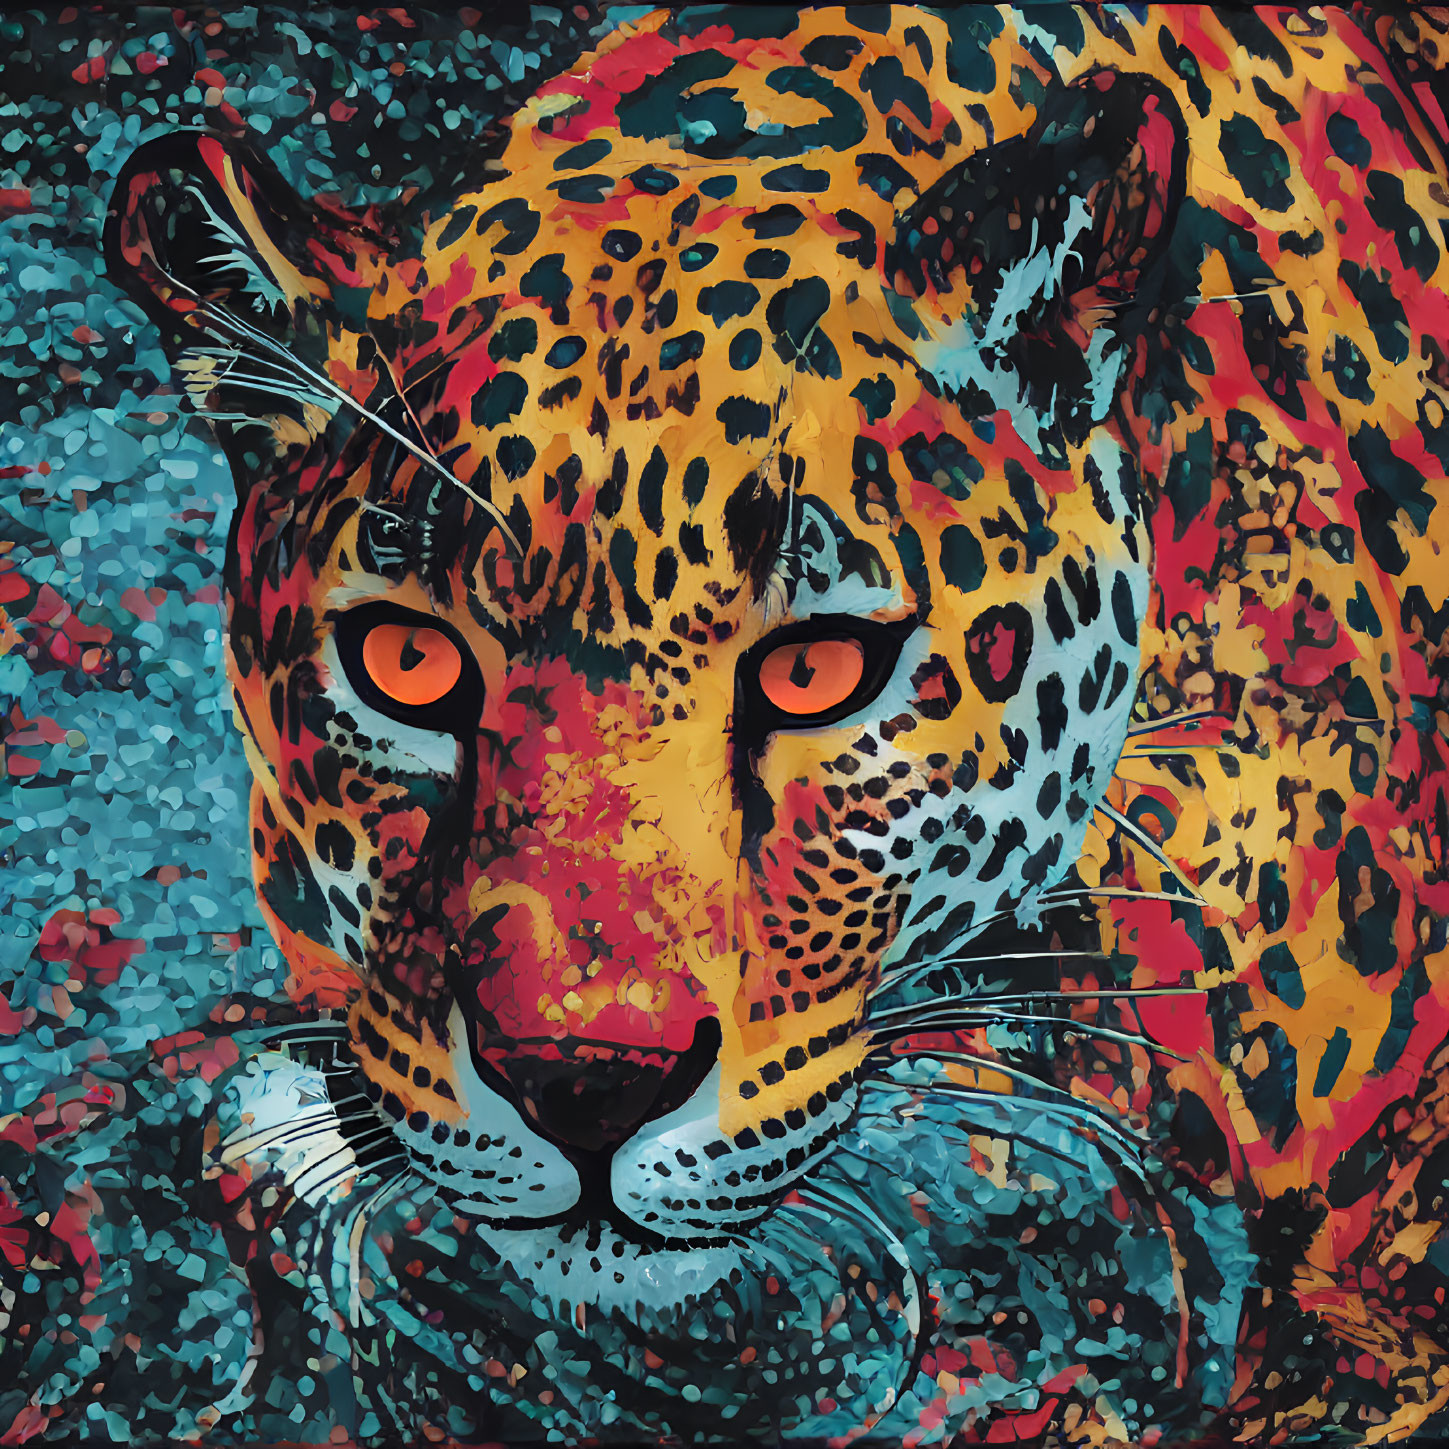 Colorful Leopard Image with Intense Orange Eyes and Patterned Background